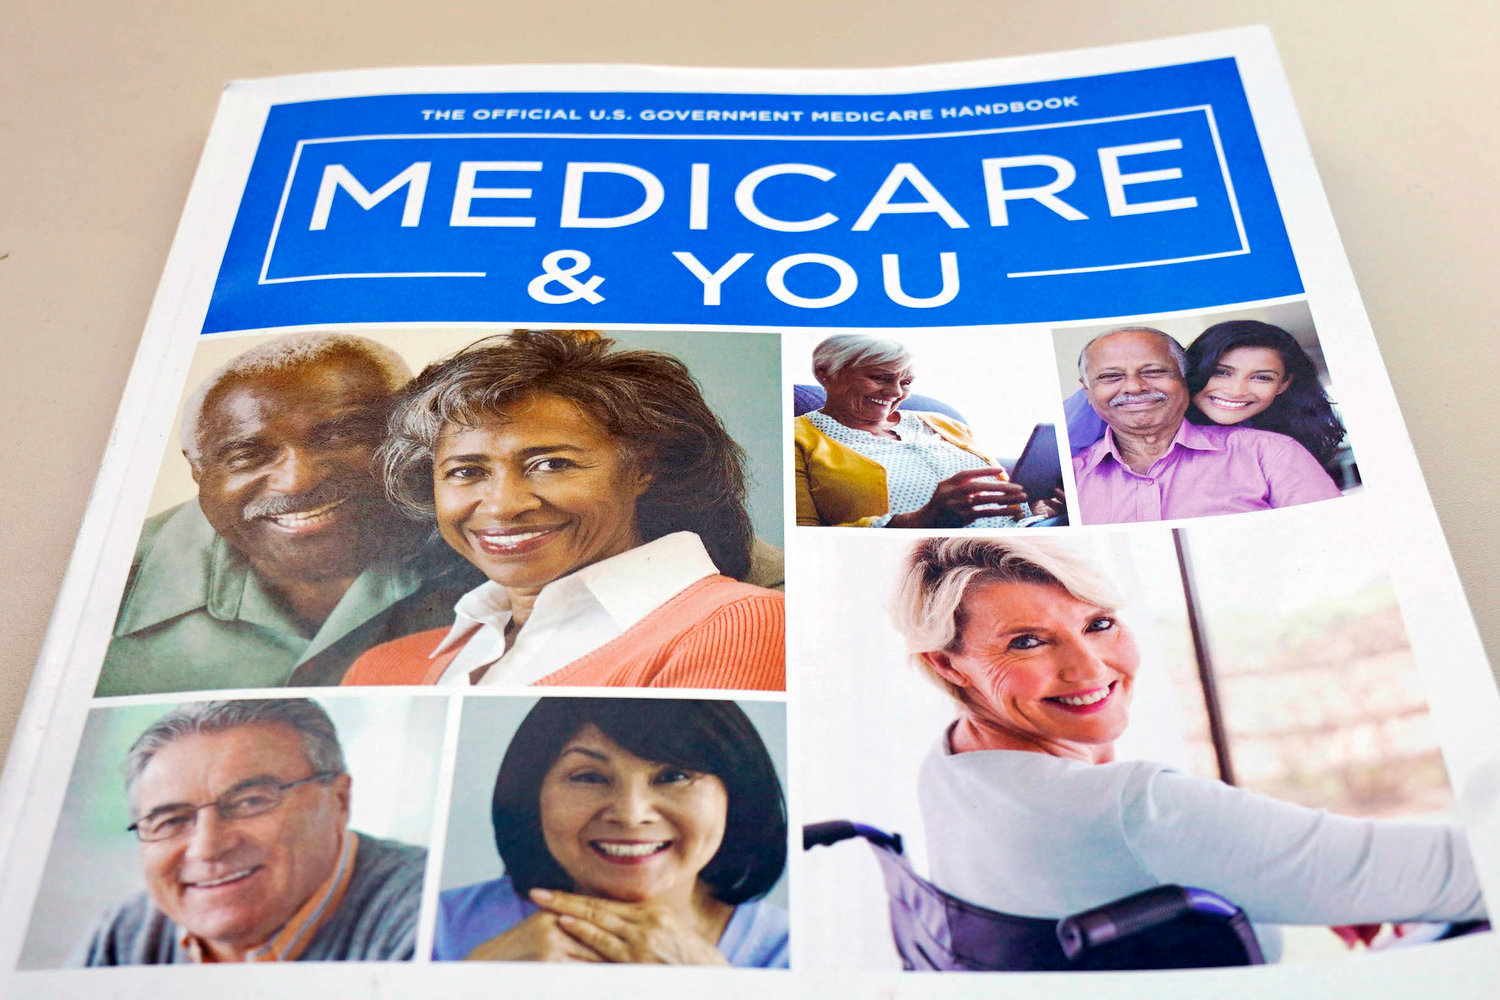 In this Nov. 8, 2018 file photo, the U.S. Medicare Handbook is photographed in Washington.